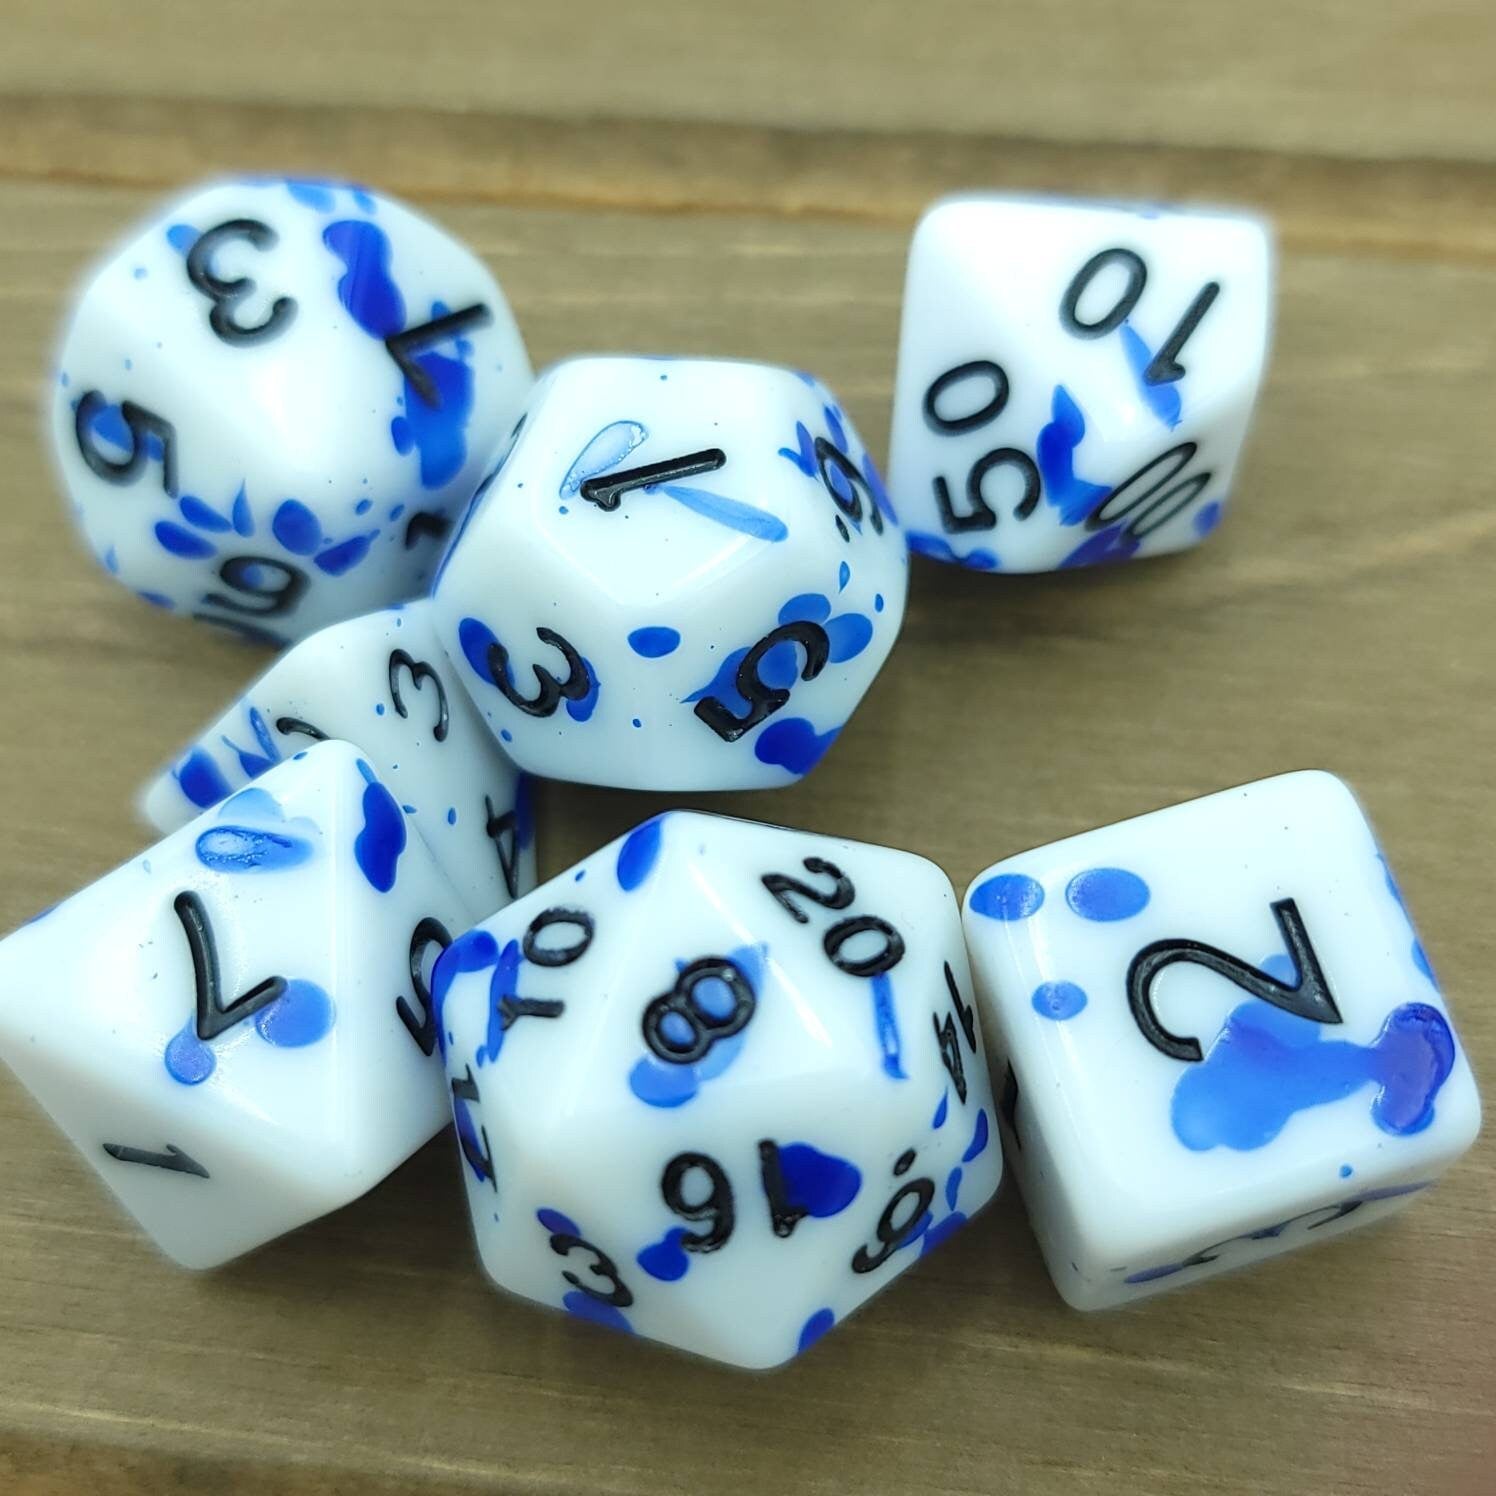 Nobles Blood | RPG Dice Set| RPG Dice | Polyhedral Dice Set | Dungeons and Dragons | DnD Dice Set | Gaming Dice Set